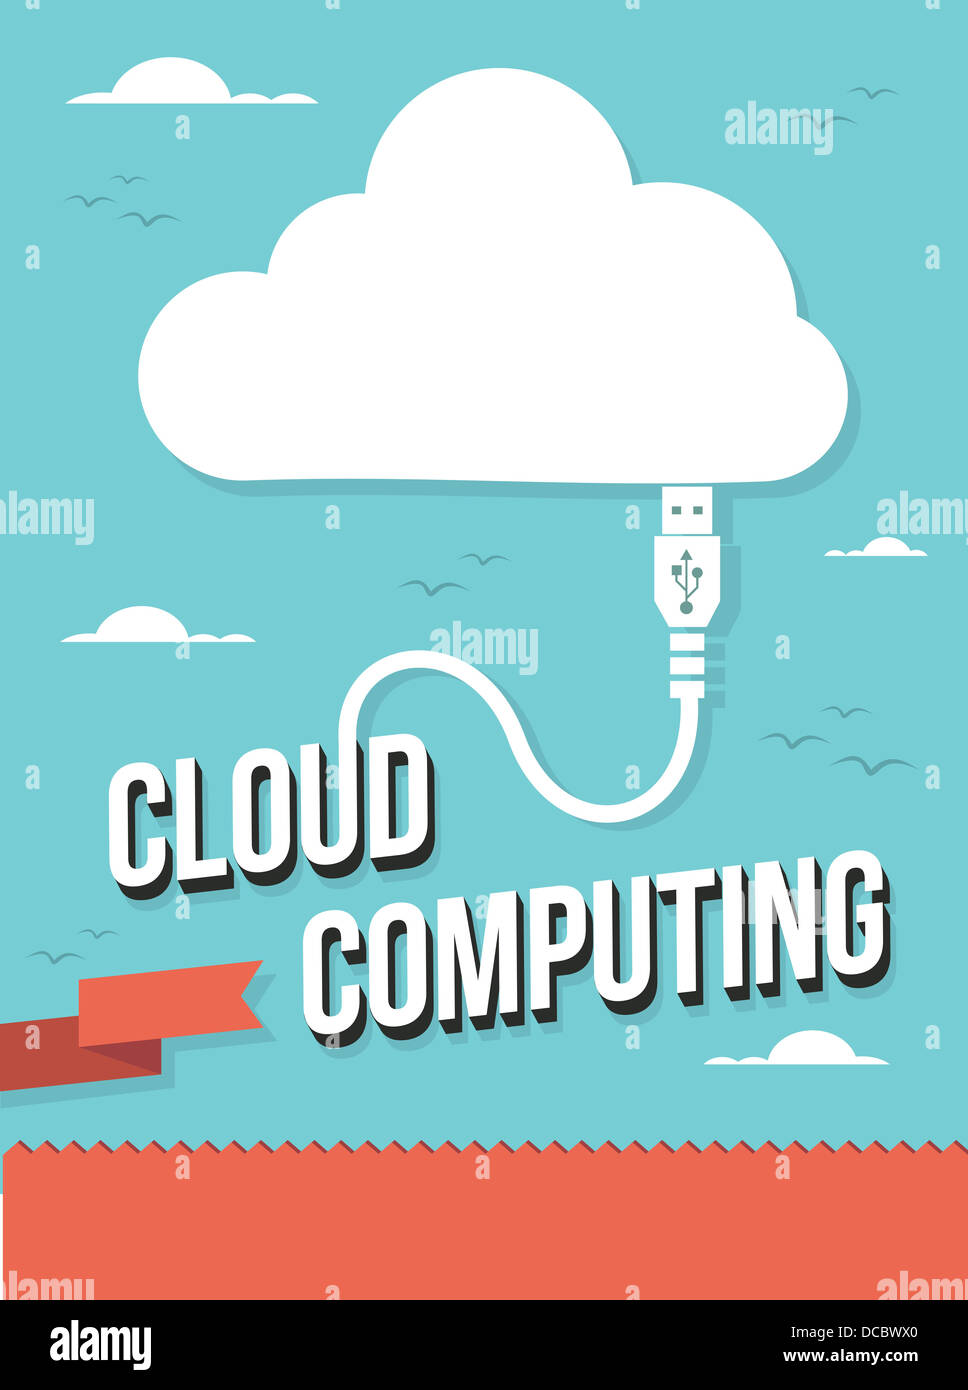 USB icon wire cloud computing text illustration. Vector illustration layered for easy manipulation and custom coloring. Stock Photo